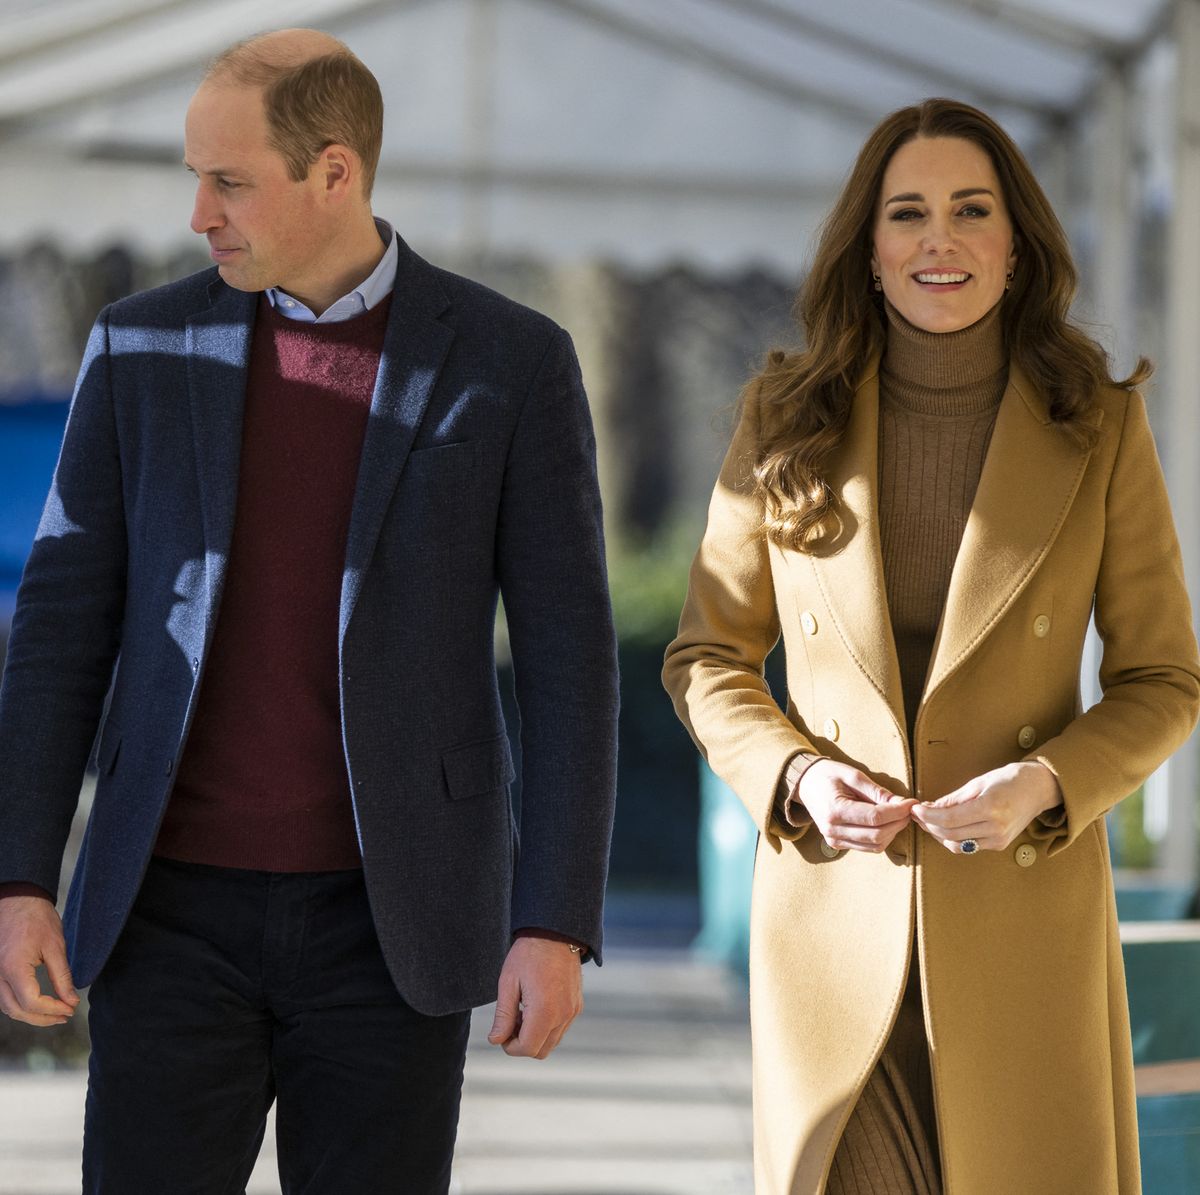 britains prince william, duke of cambridge c and his wife britains catherine, duchess of cambridge r, visit national health service nhs staff and patients at clitheroe community hospital in north east england on january 20, 2022, to hear about their experiences during the covid 19 pandemic photo by james glossop  pool  afp photo by james glossoppoolafp via getty images